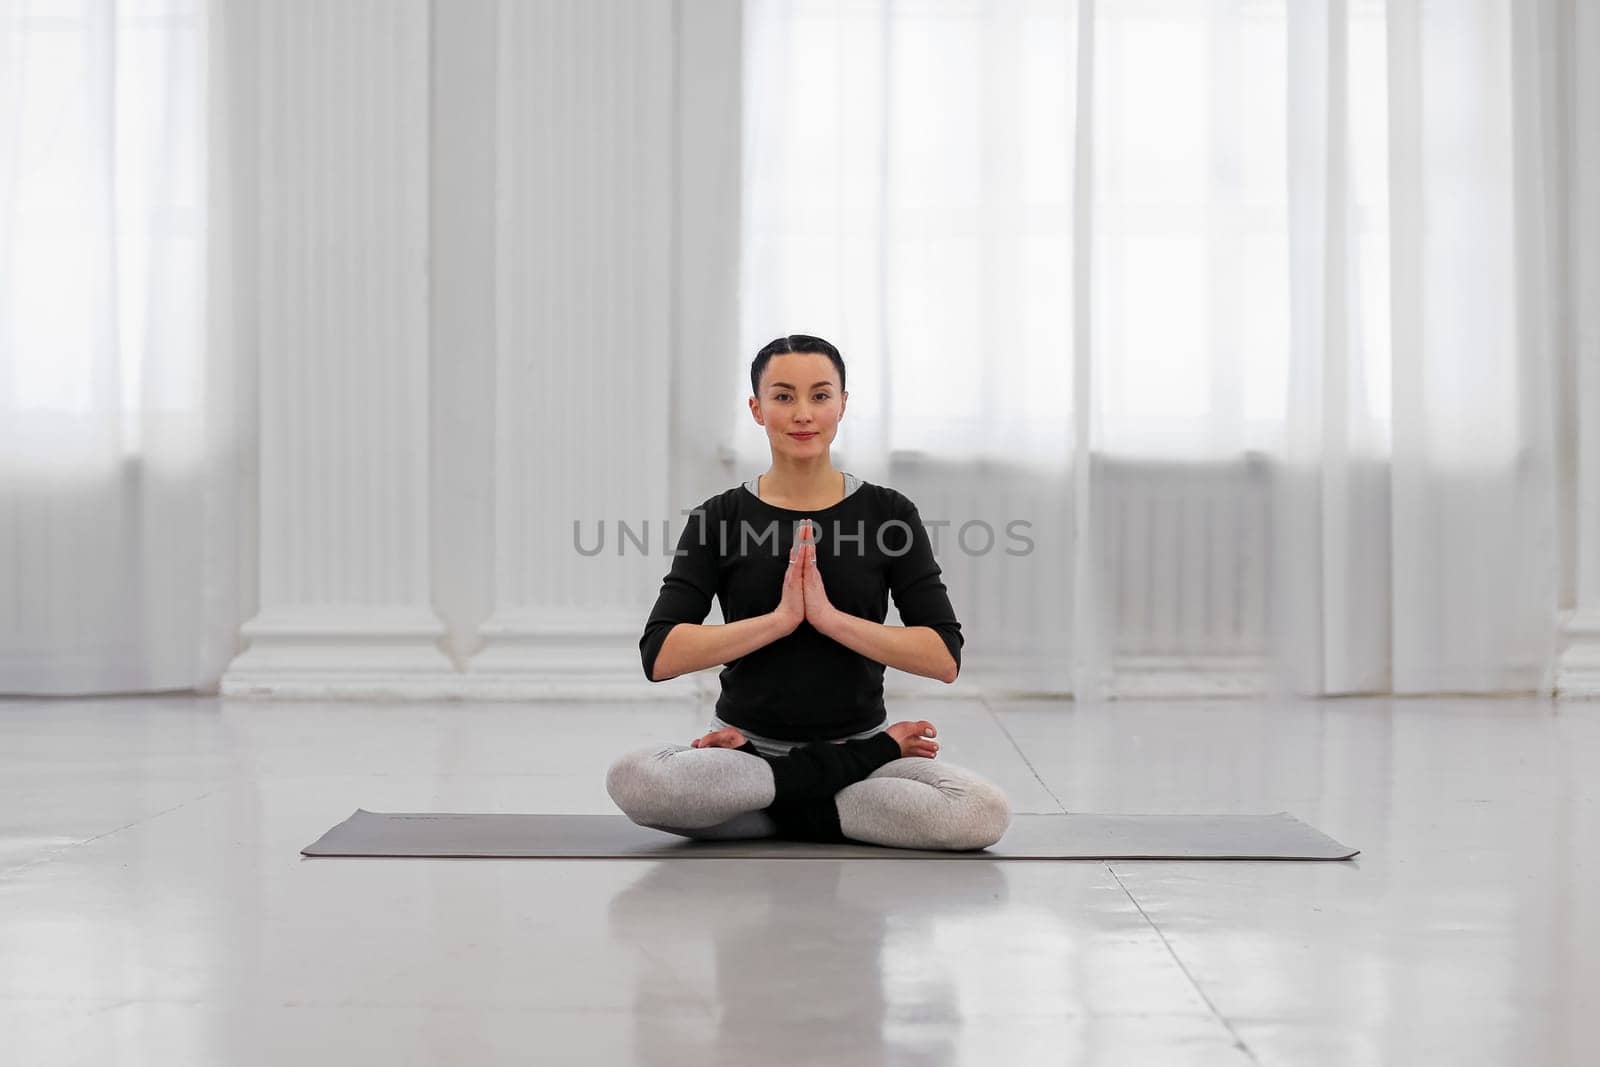 Healthy young woman doing padmasana lotus pose during yoga classes in a cozy bright room. The concept symbolizes purity and perfection with Buddhist meditation by apavlin